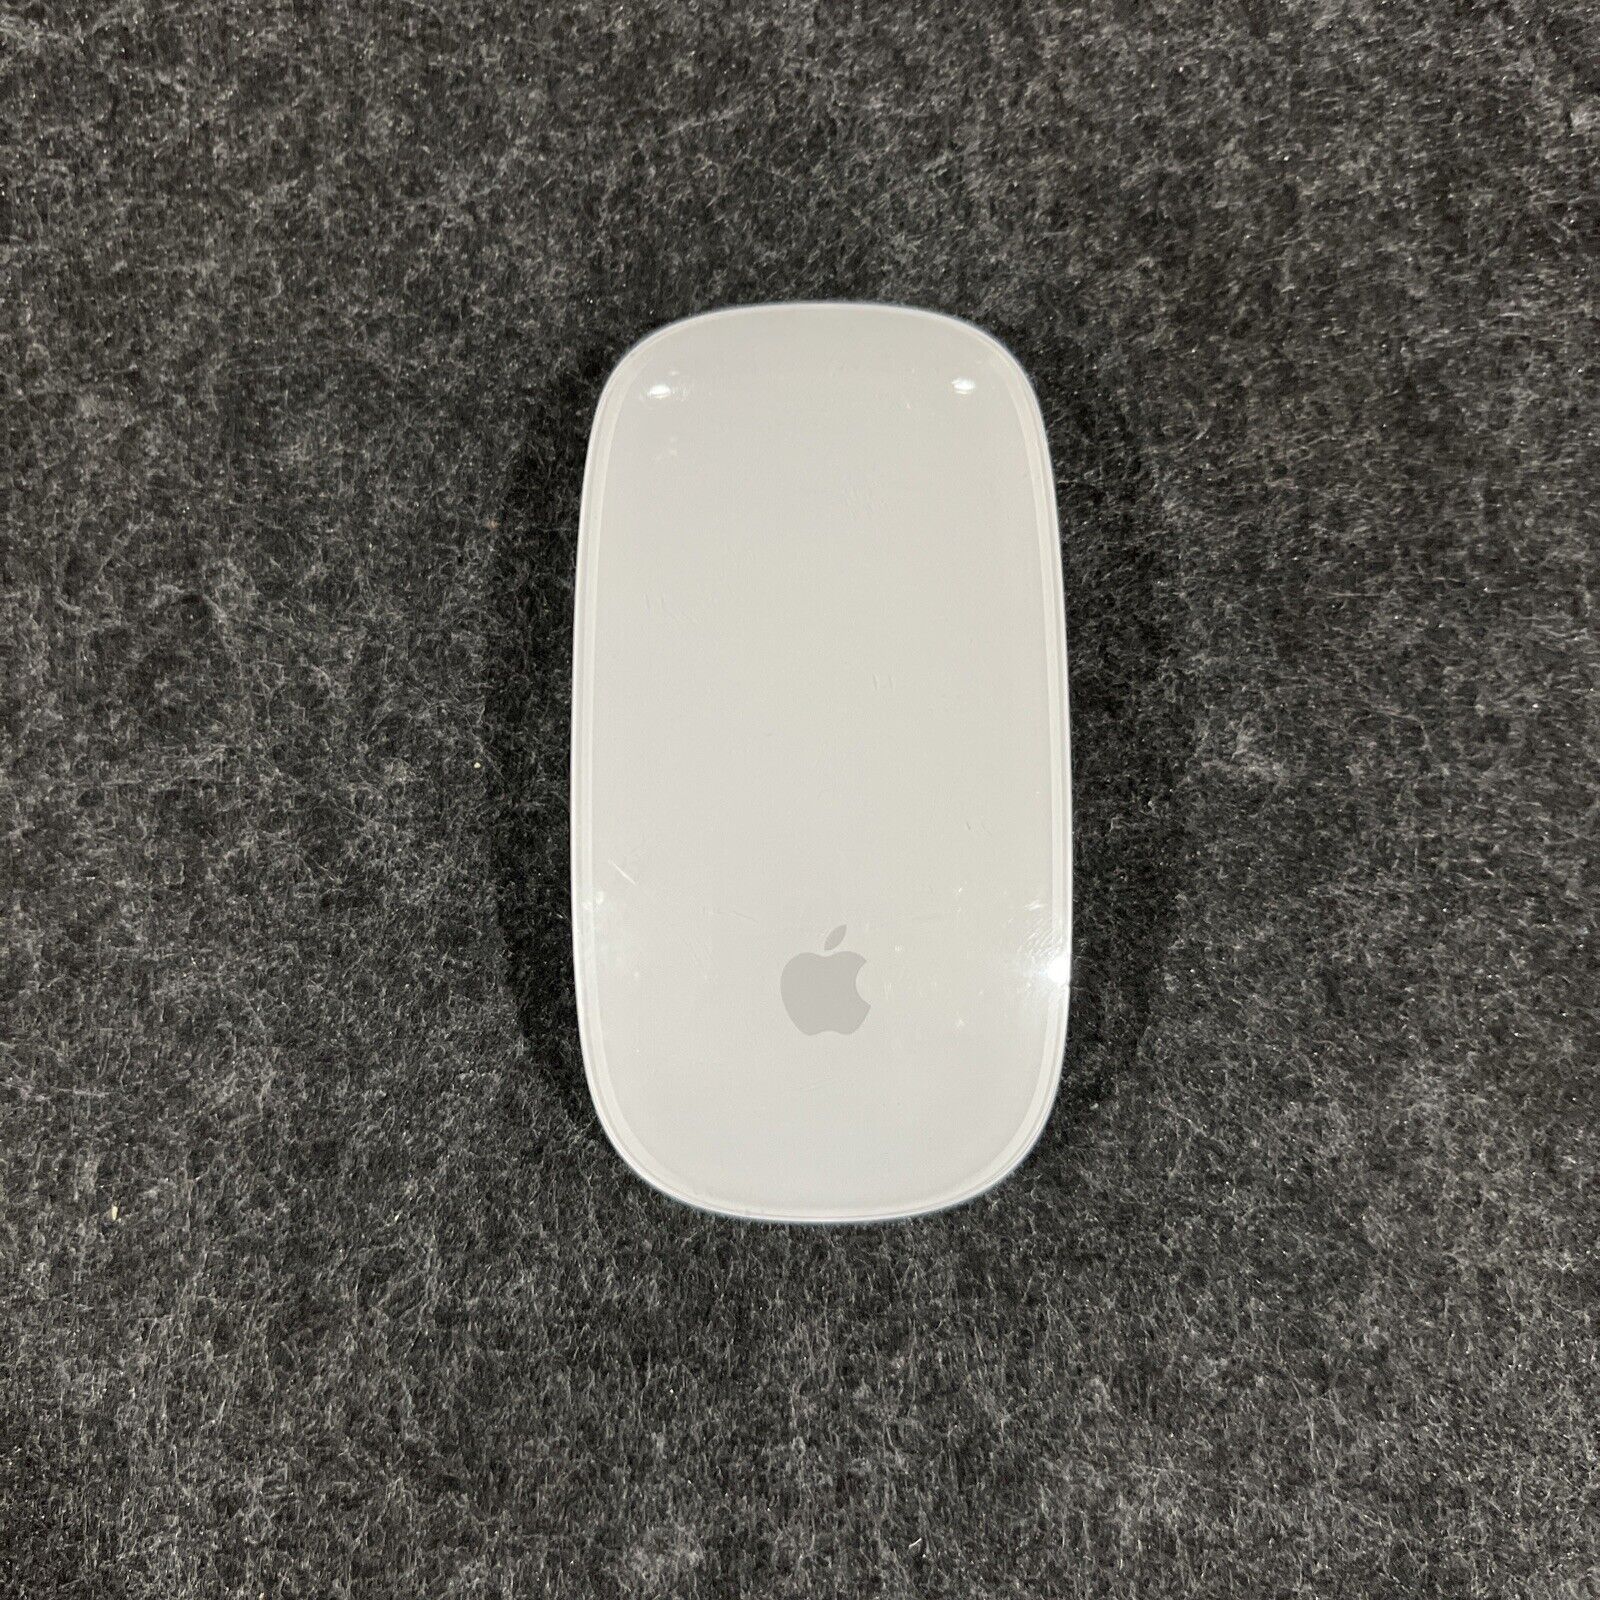 Apple Magic Mouse 2 Wireless Mouse - Silver - Used